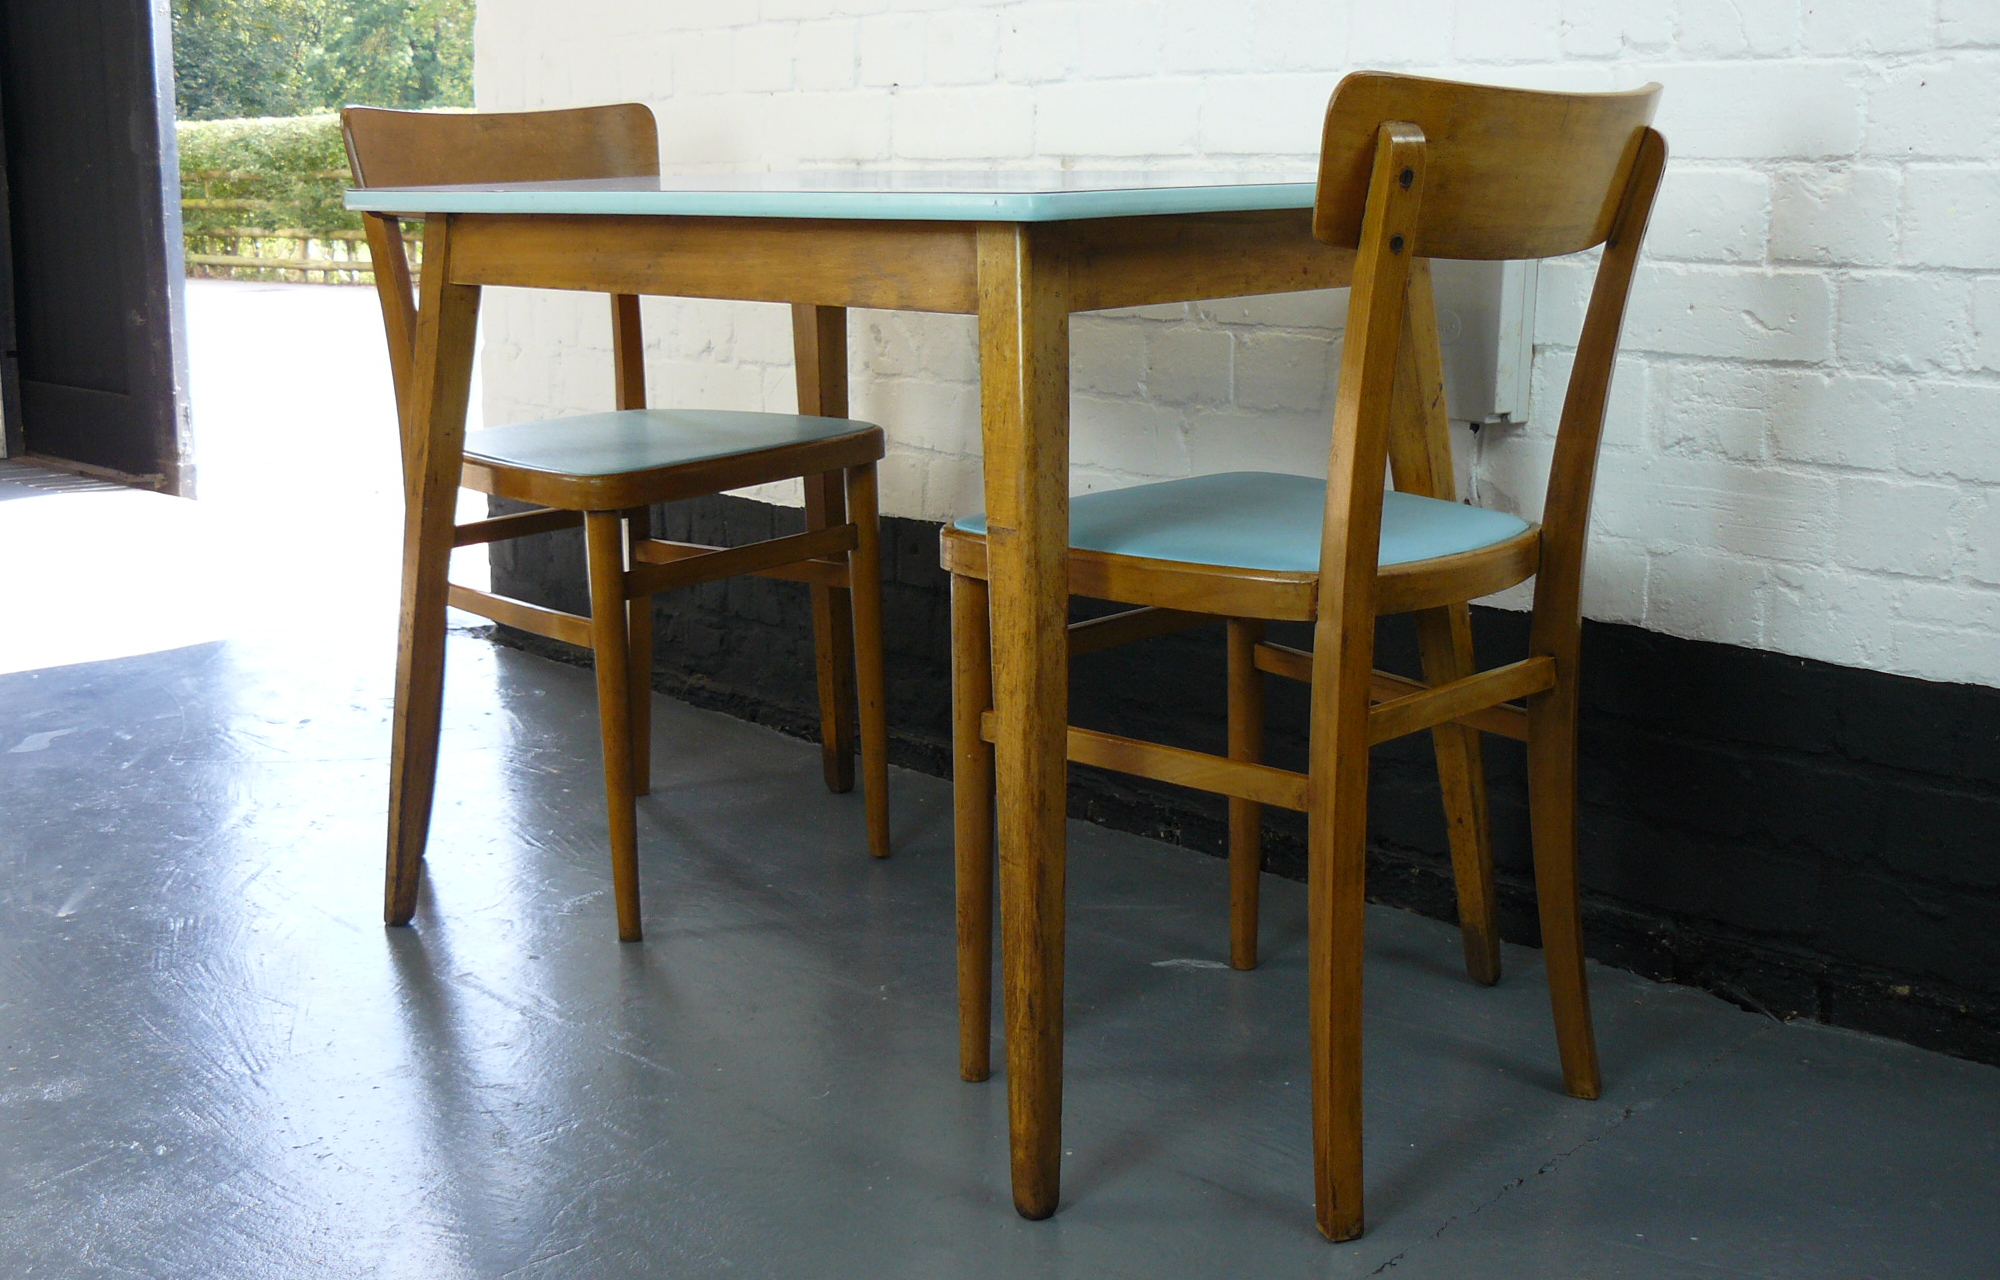 1960s Vintage Kitchen Table and Two Chairs SOLD